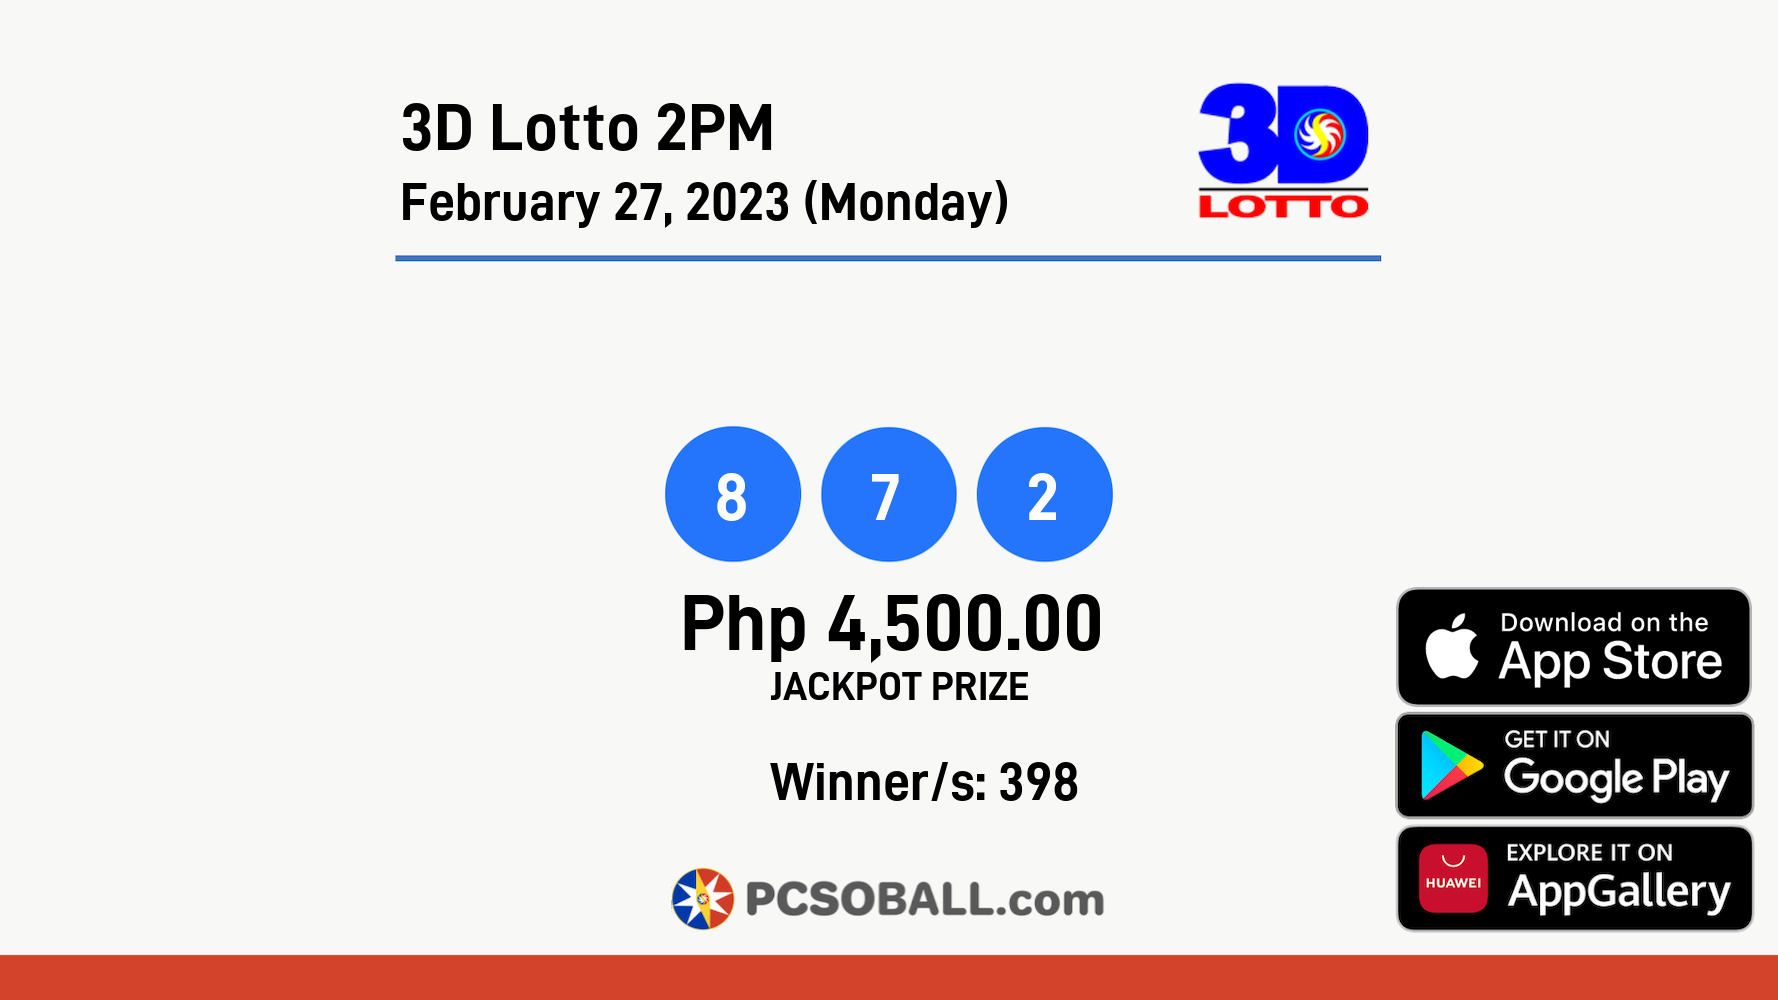 3D Lotto 2PM February 27, 2023 (Monday) Result